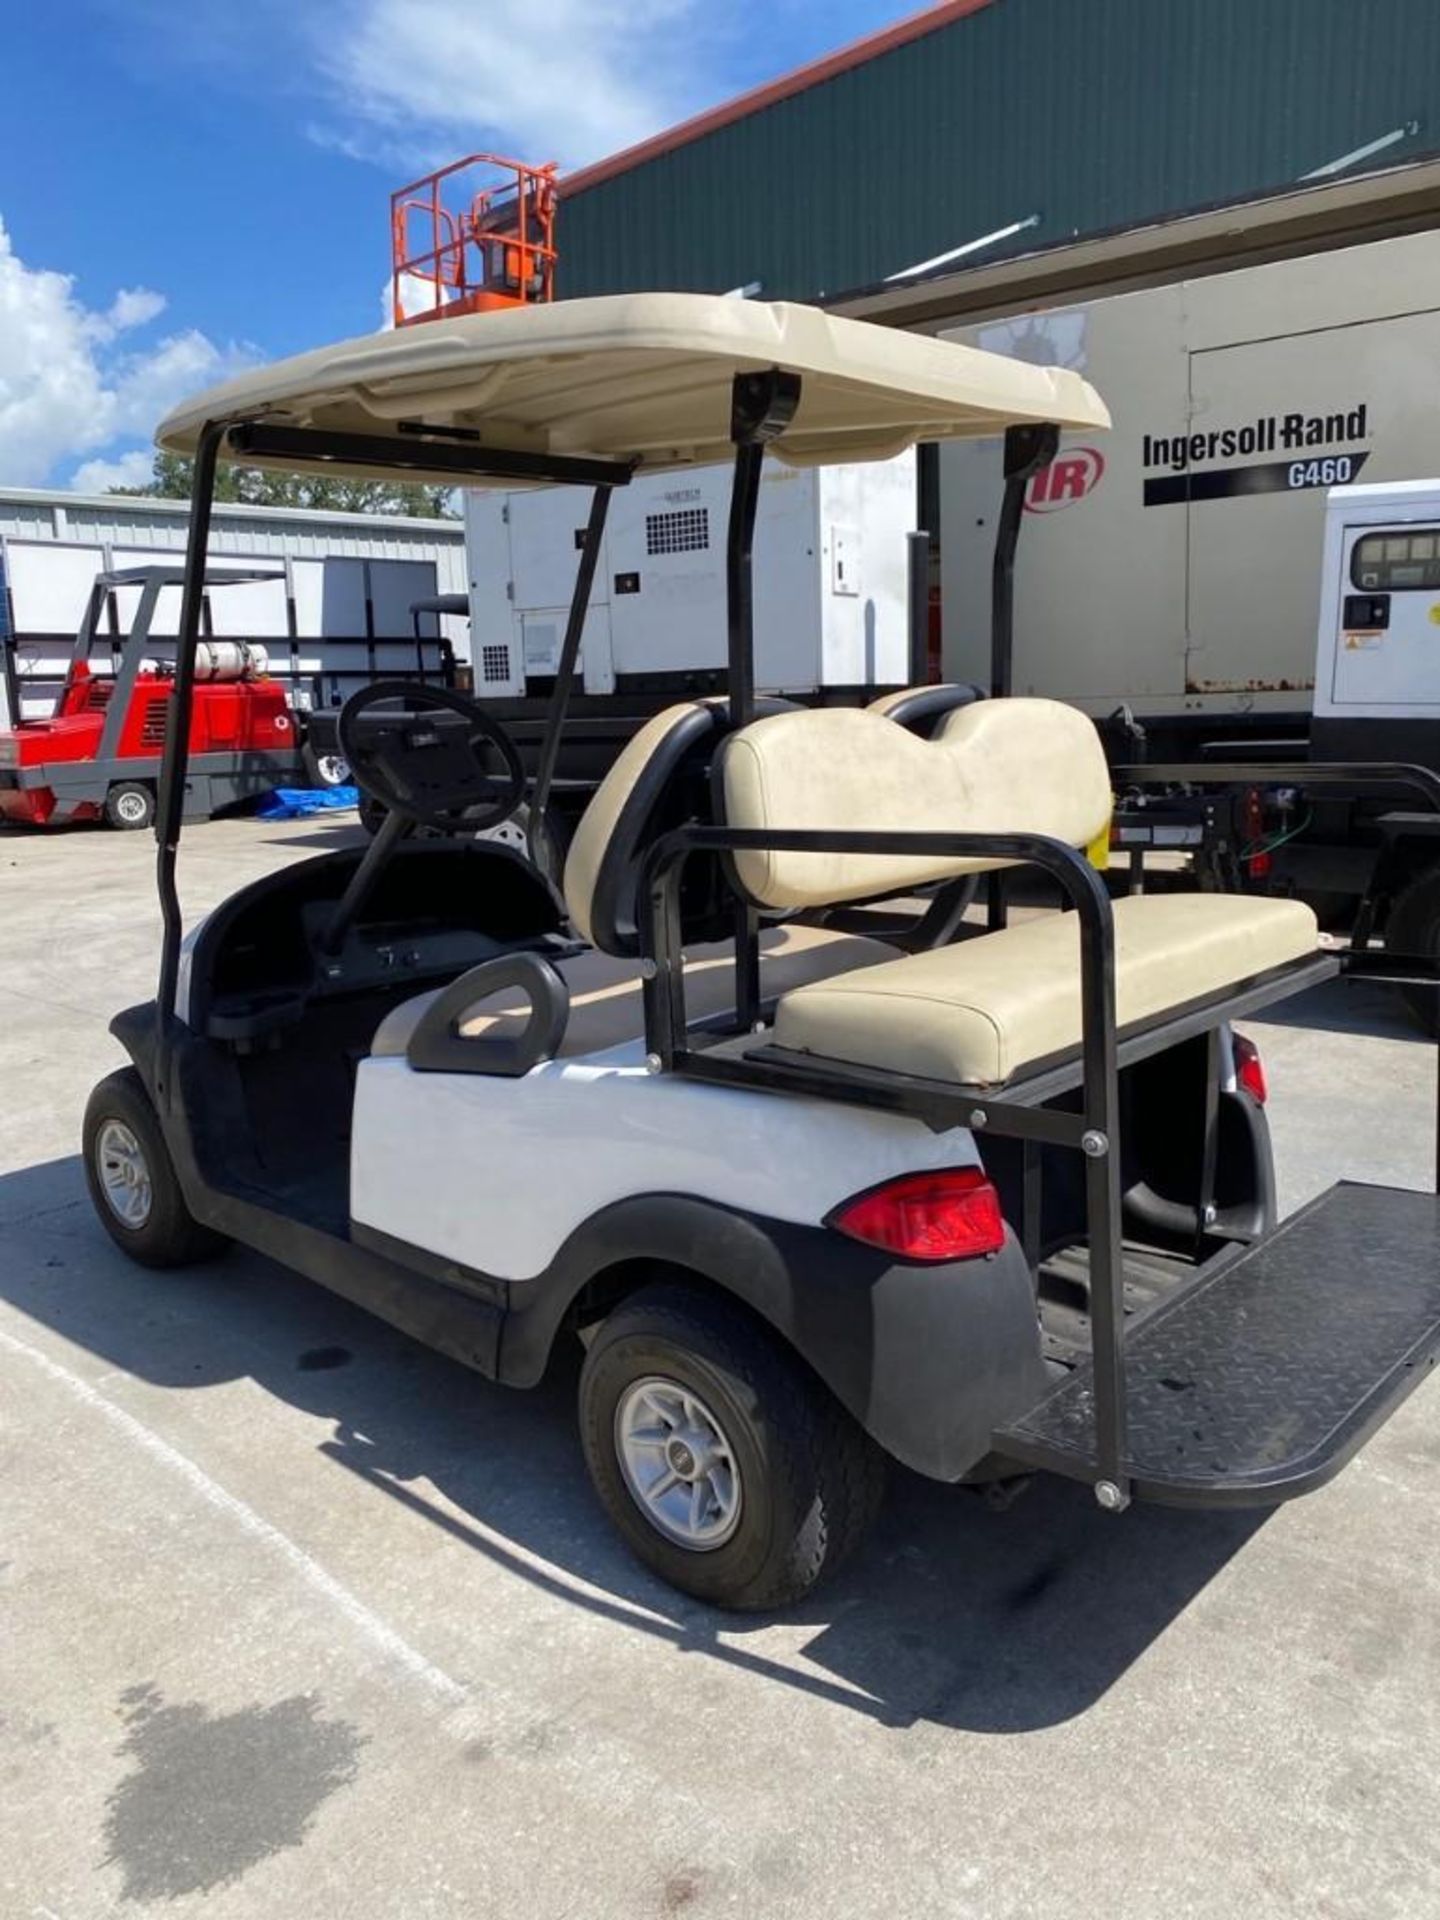 CLUB CAR ELECTRIC 4-SEATER GOLF CART, BATTERY CHARGER INCLUDED - Image 4 of 16